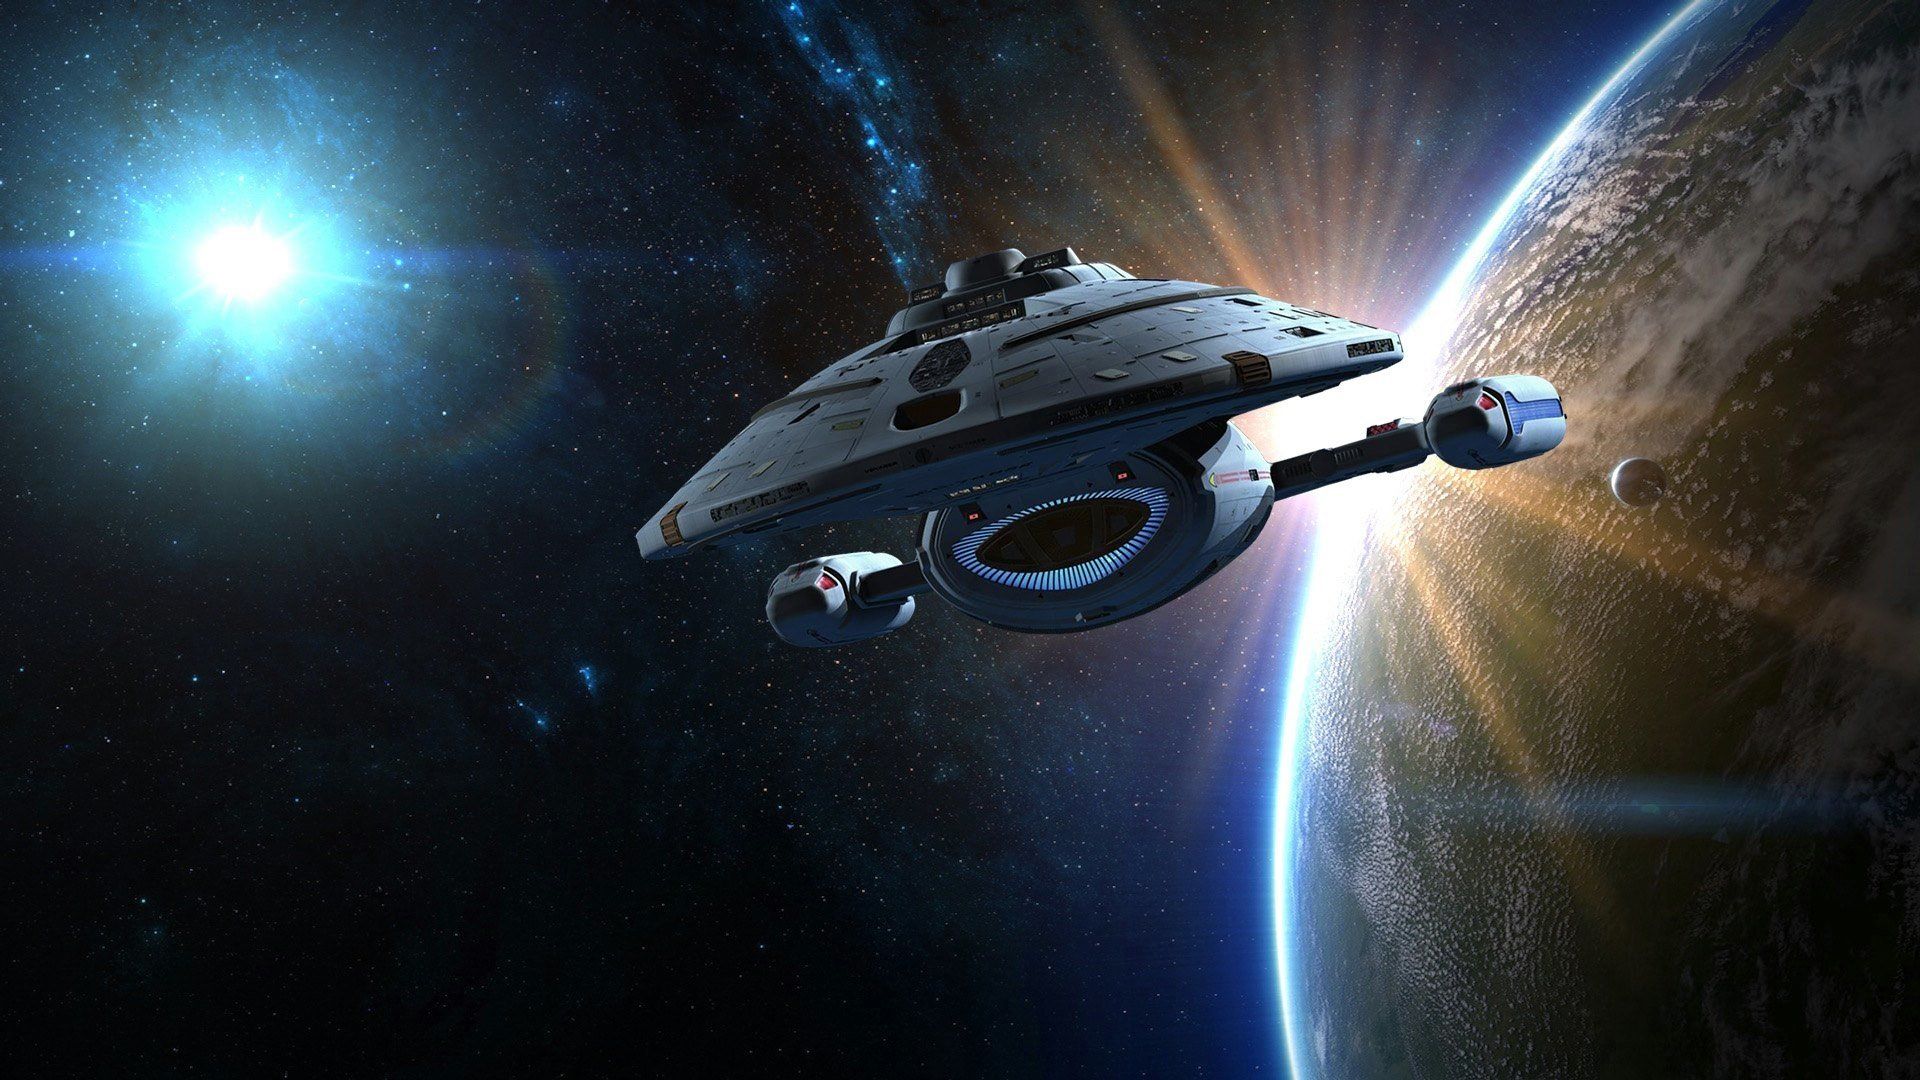 A picture of Star Trek's USS Voyager is shown against a galactic backdrop.